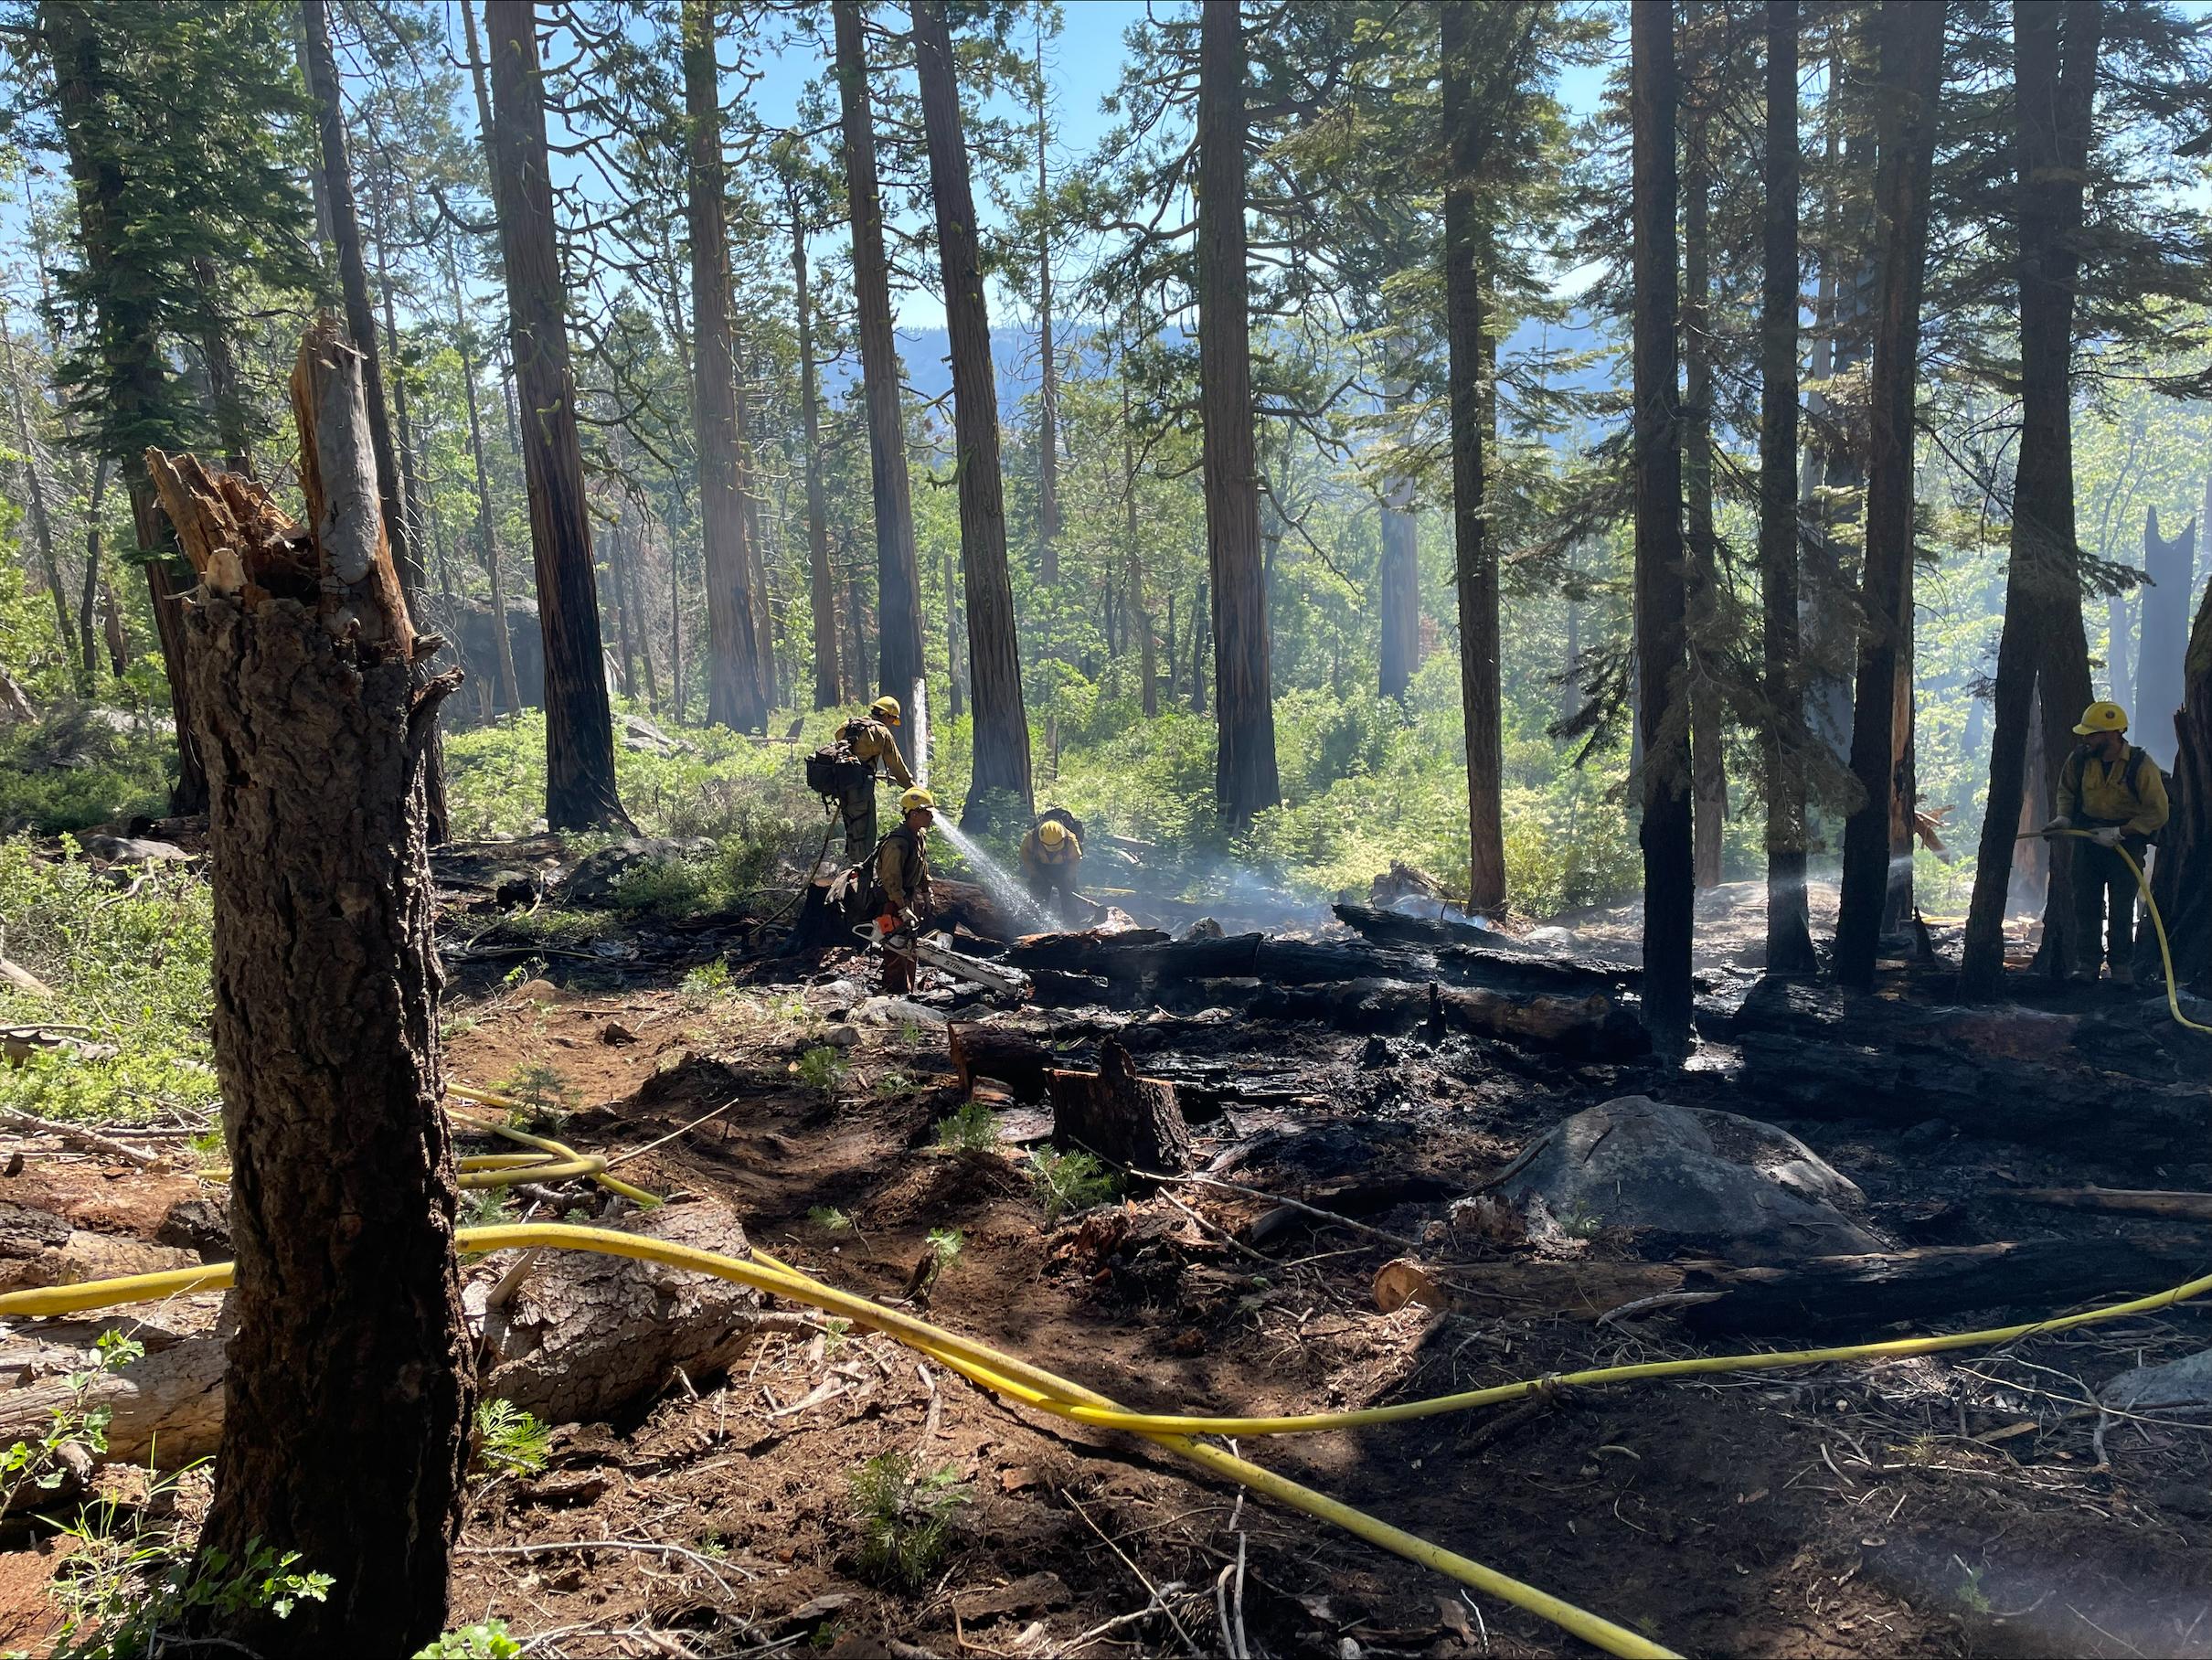 Firefighters working in a sparsely forested area